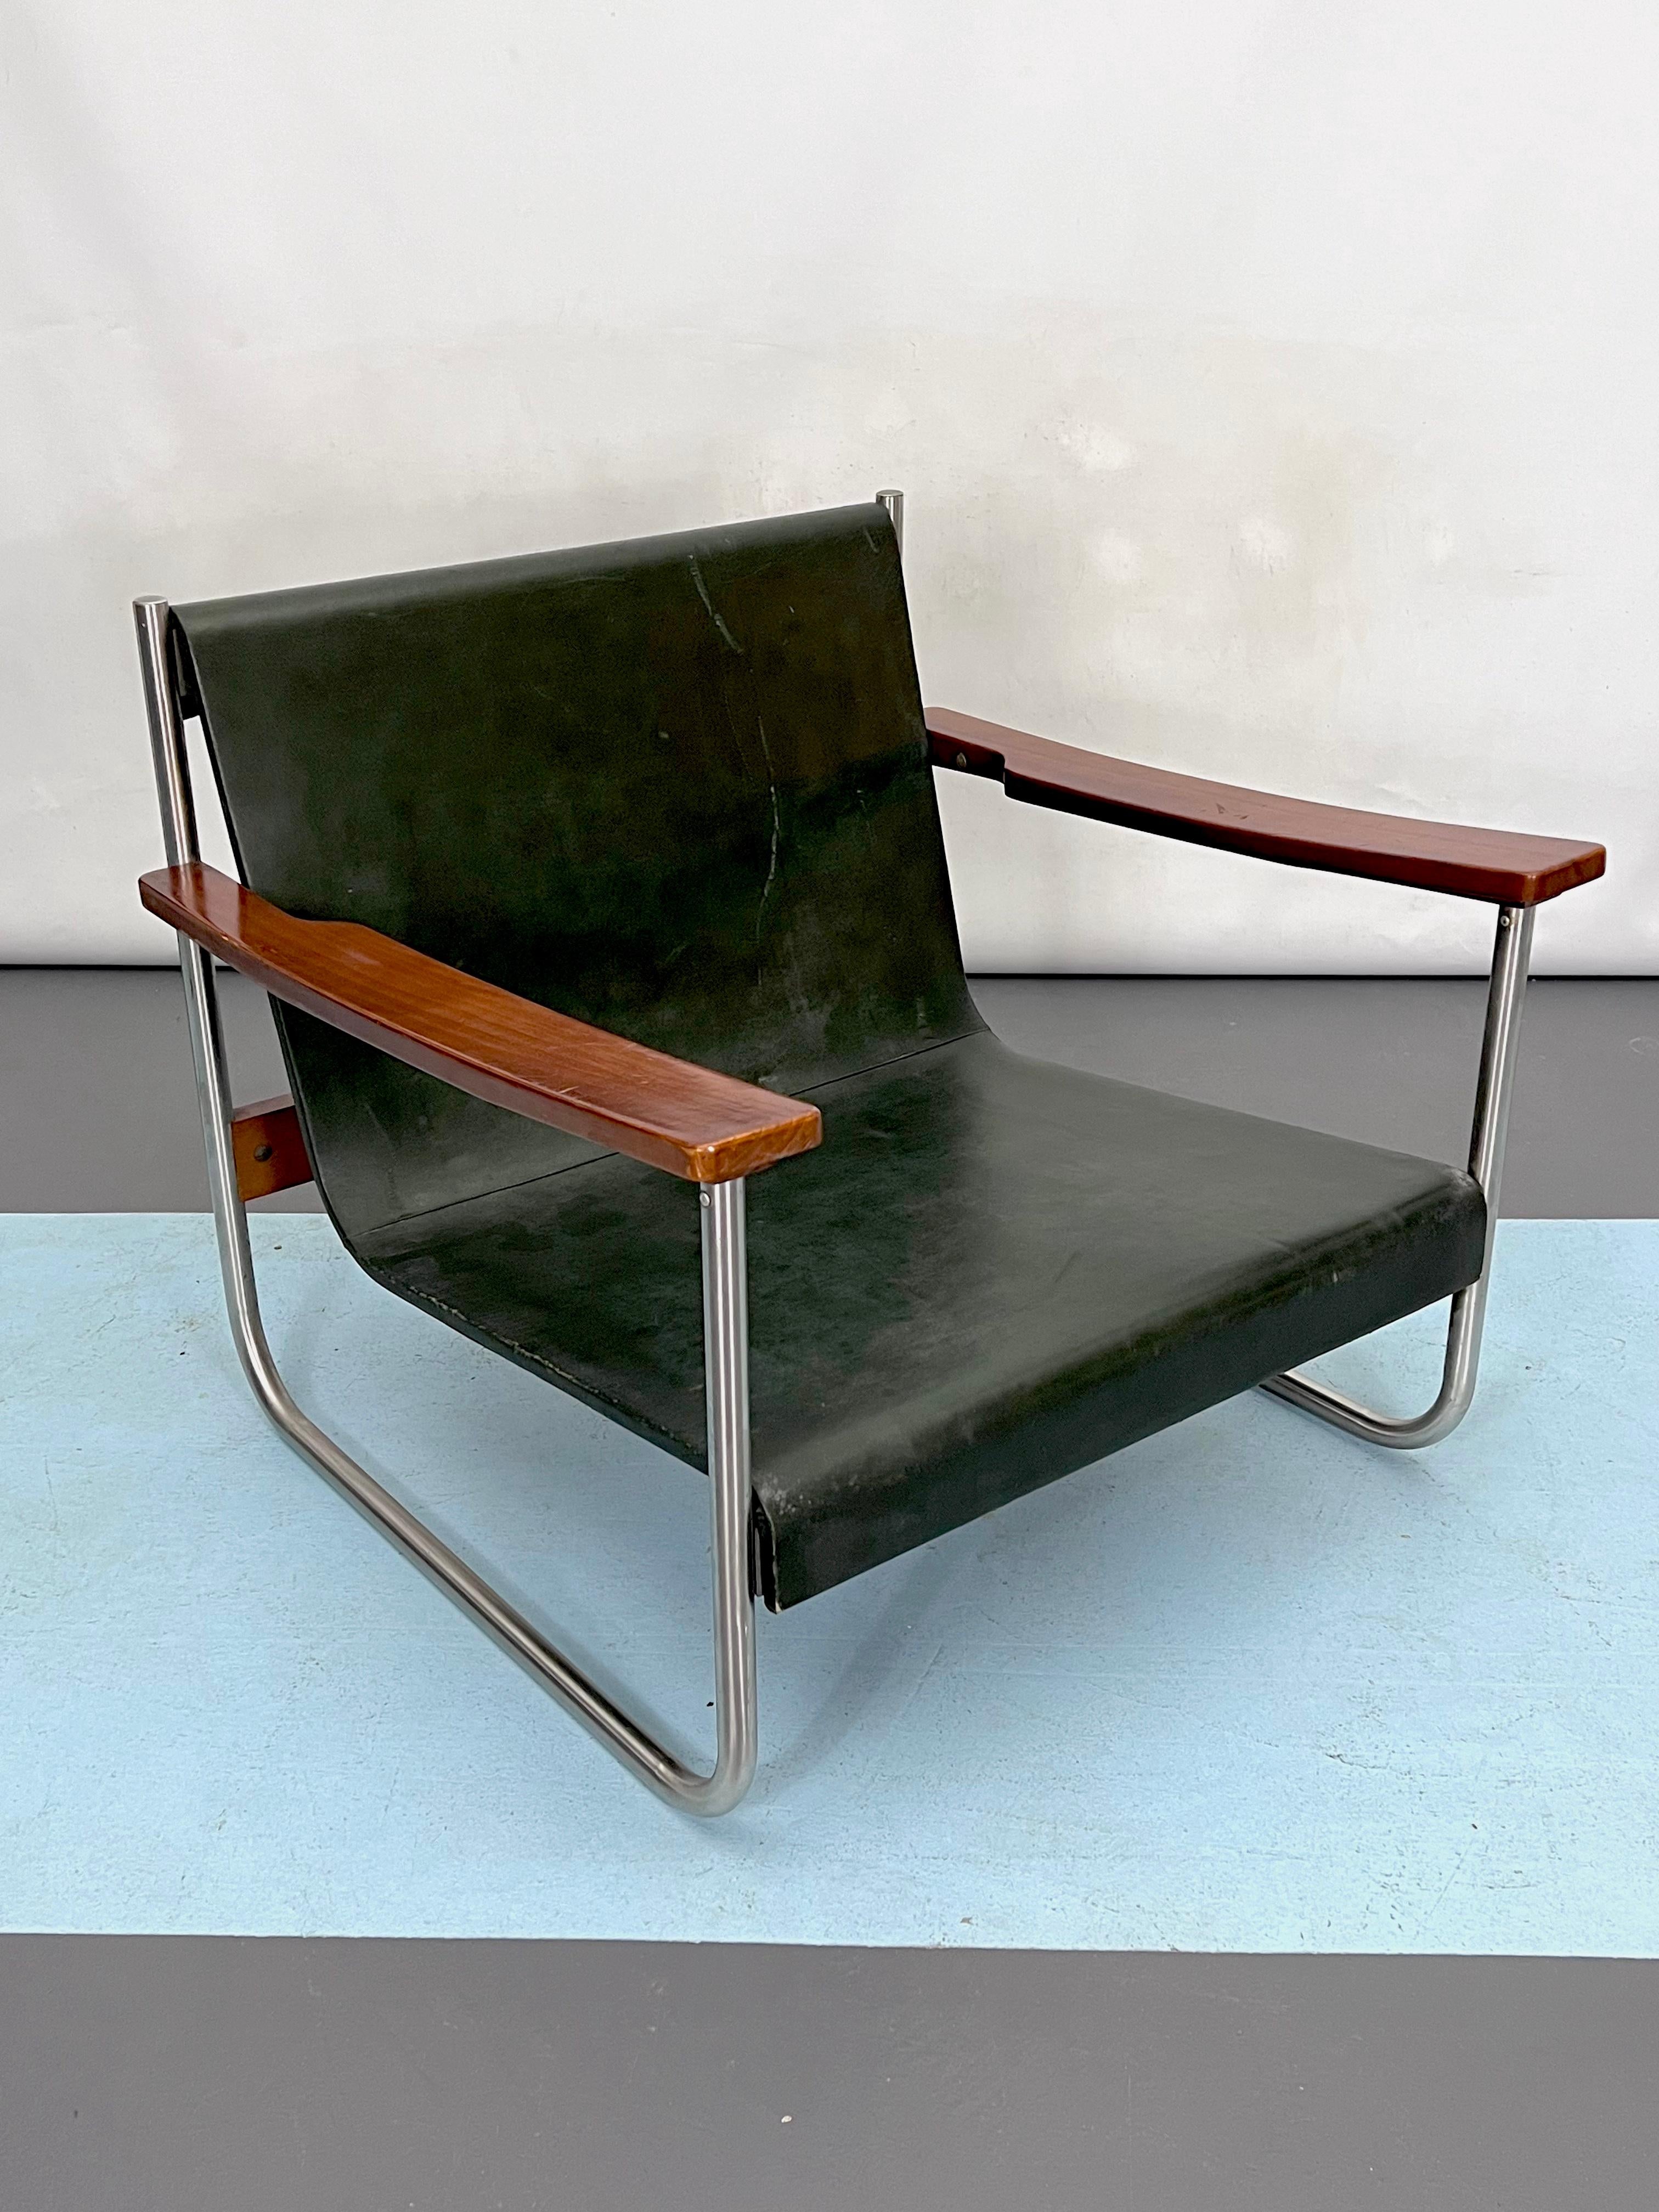 Fair vintage condition with trace of age and use for this lounge chair produced in Italy during the 60s and made from chrome, wood and leather. Some defects on the leather.
      